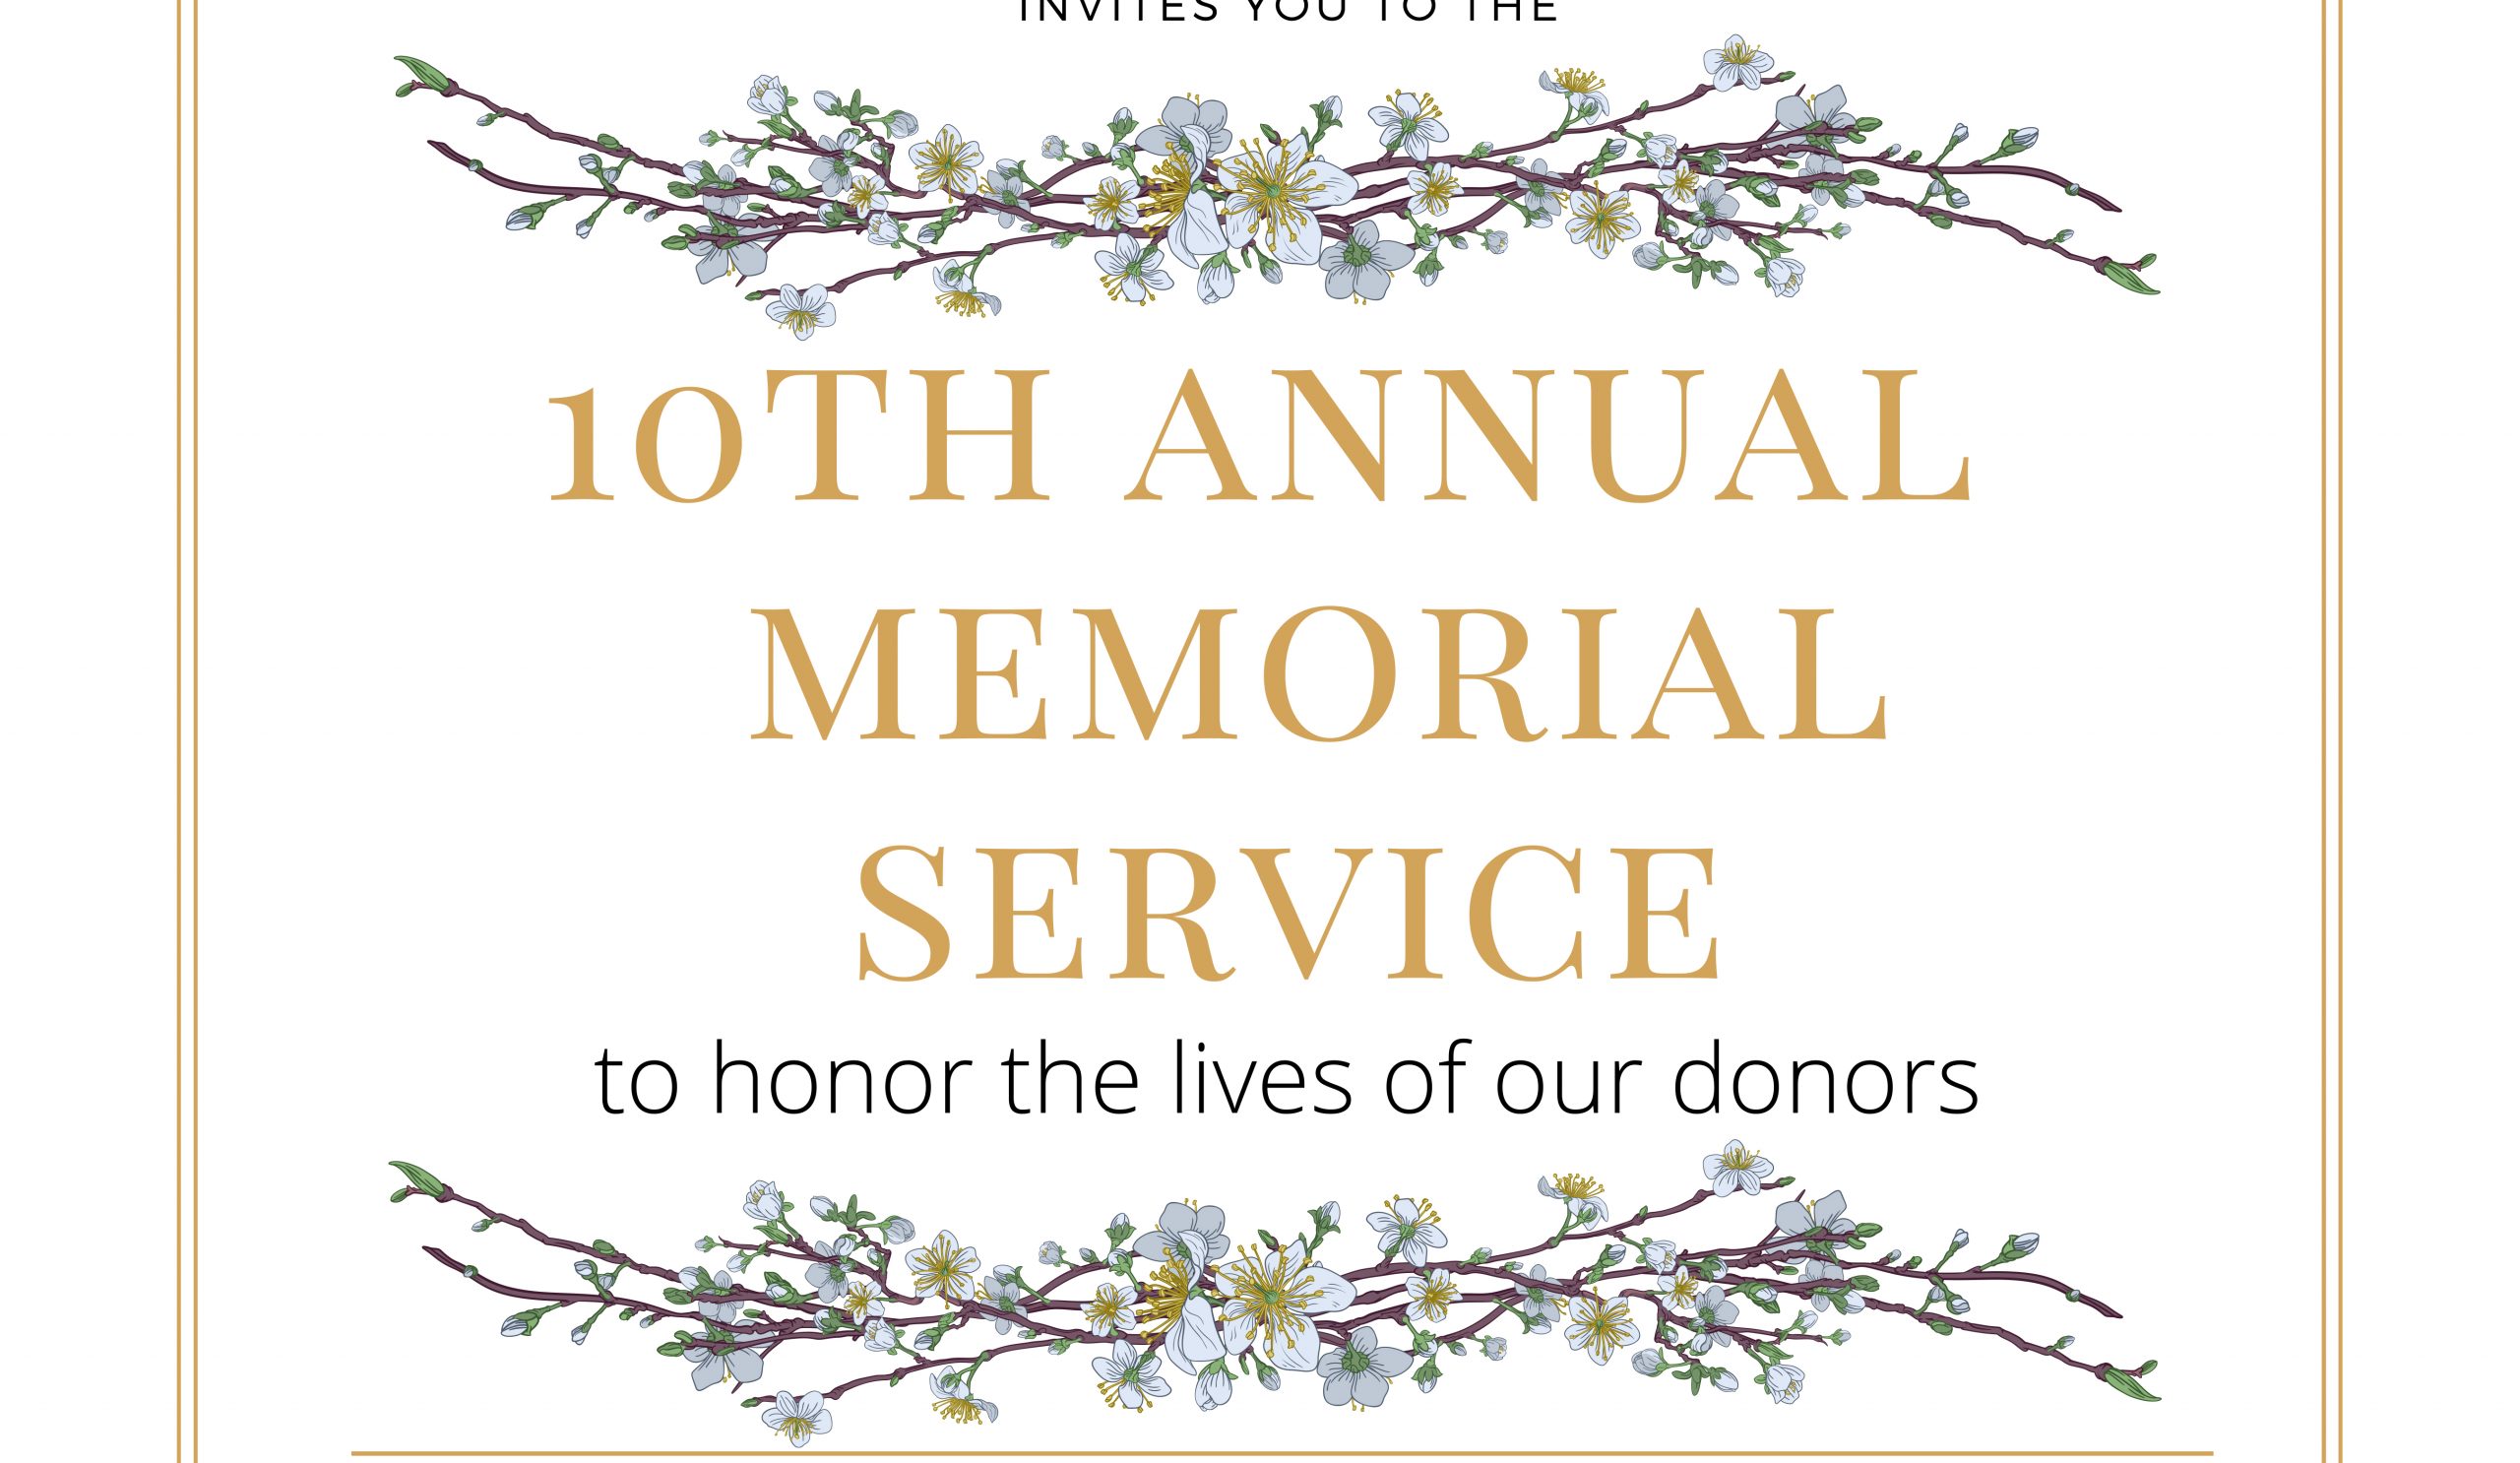 10th Annual Memorial Service to honor the lives of donors to the Mortuary Science program